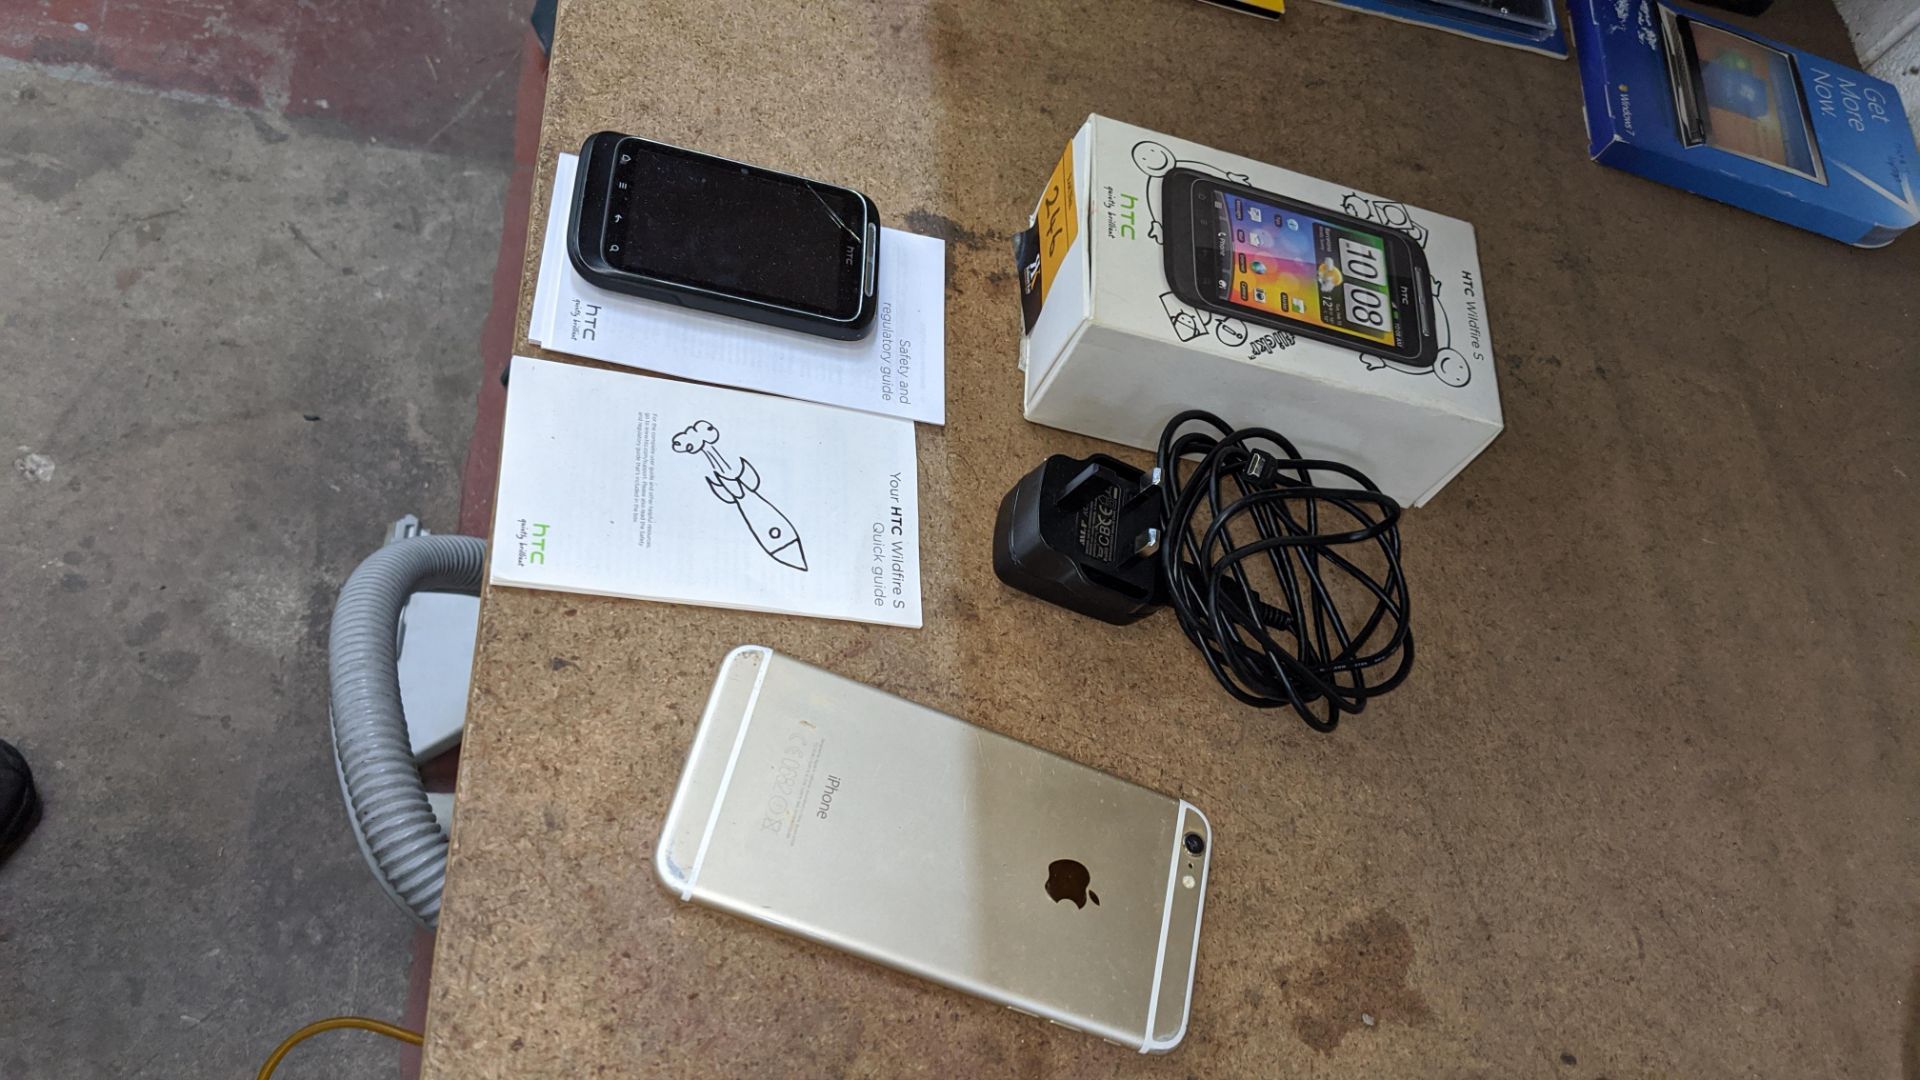 Mobile phone lot comprising Apple iPhone 6 plus model A1524 in rose gold (no ancillaries) with broke - Image 8 of 9